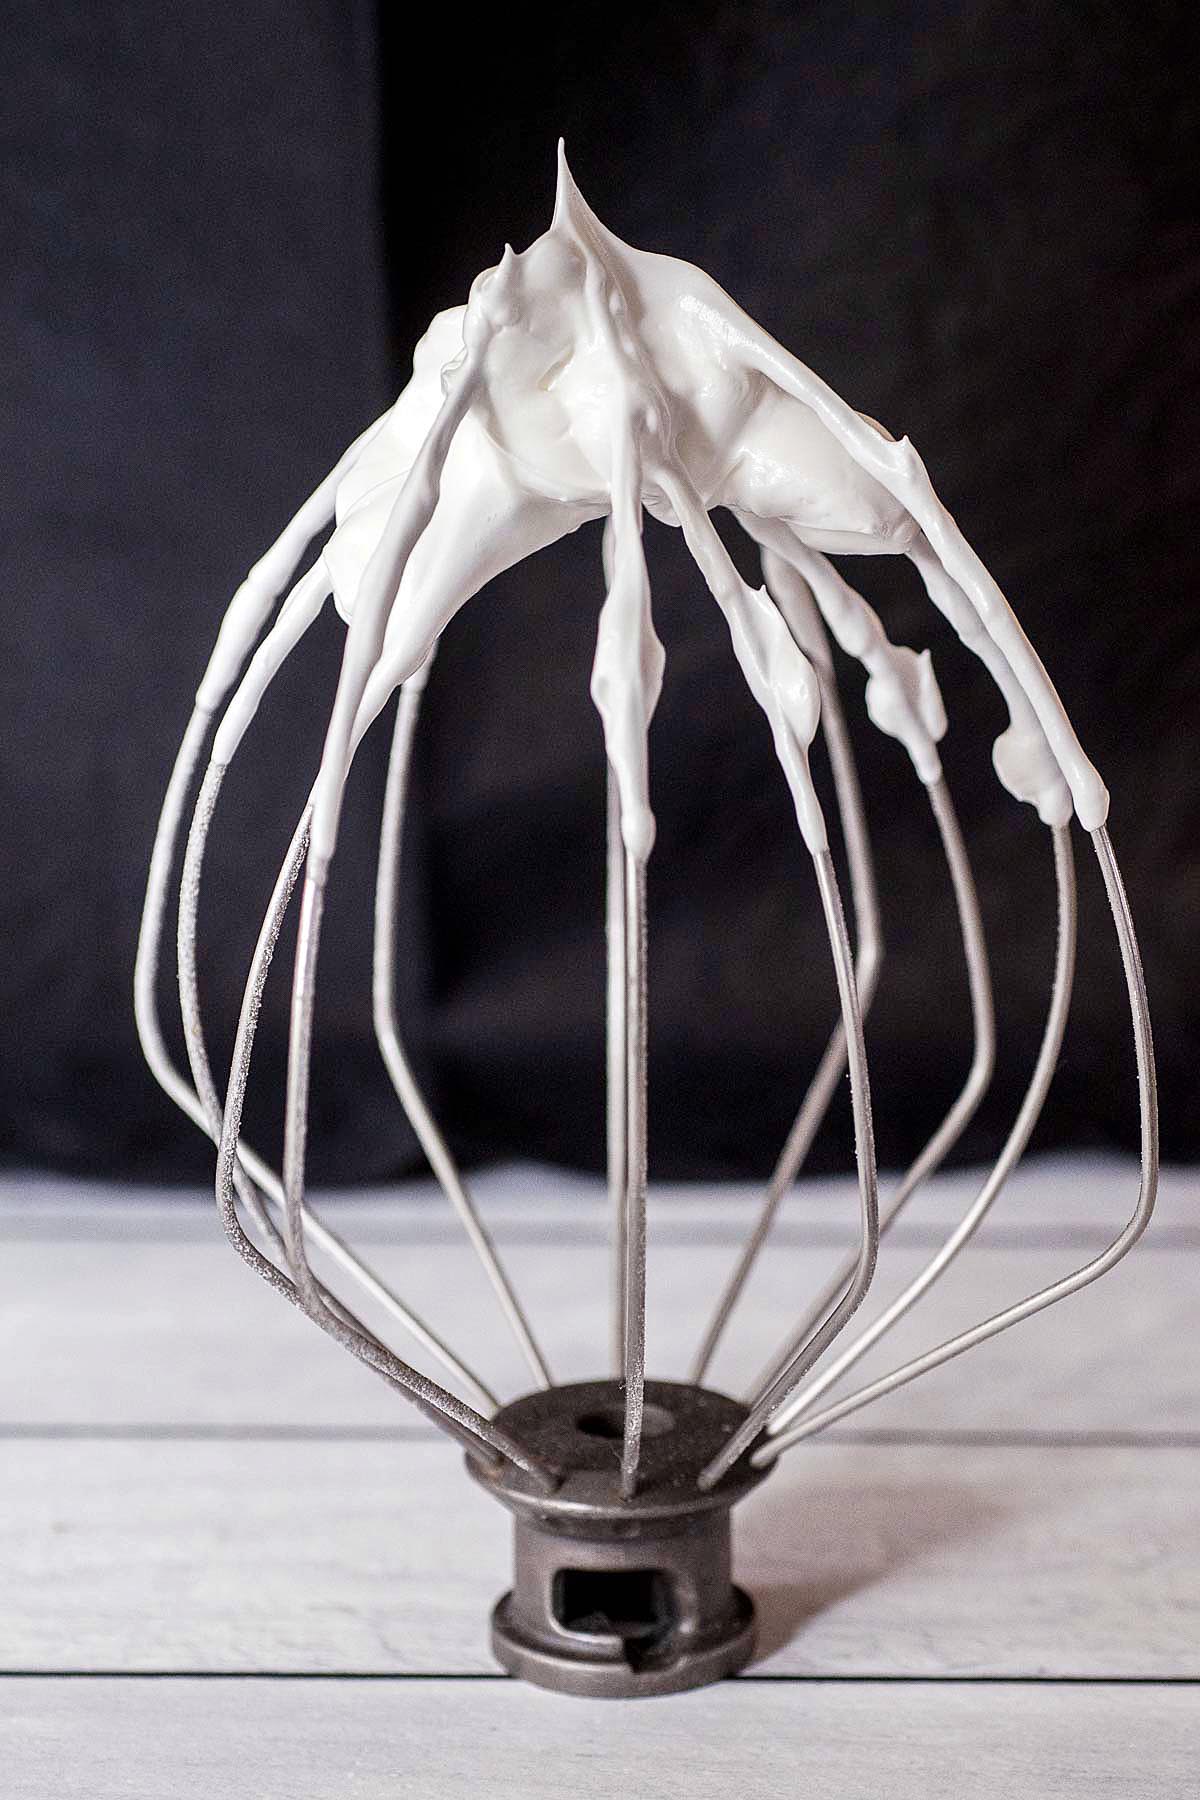 A stand mixer whip attachment with stiff meringue, peaks standing up straight.